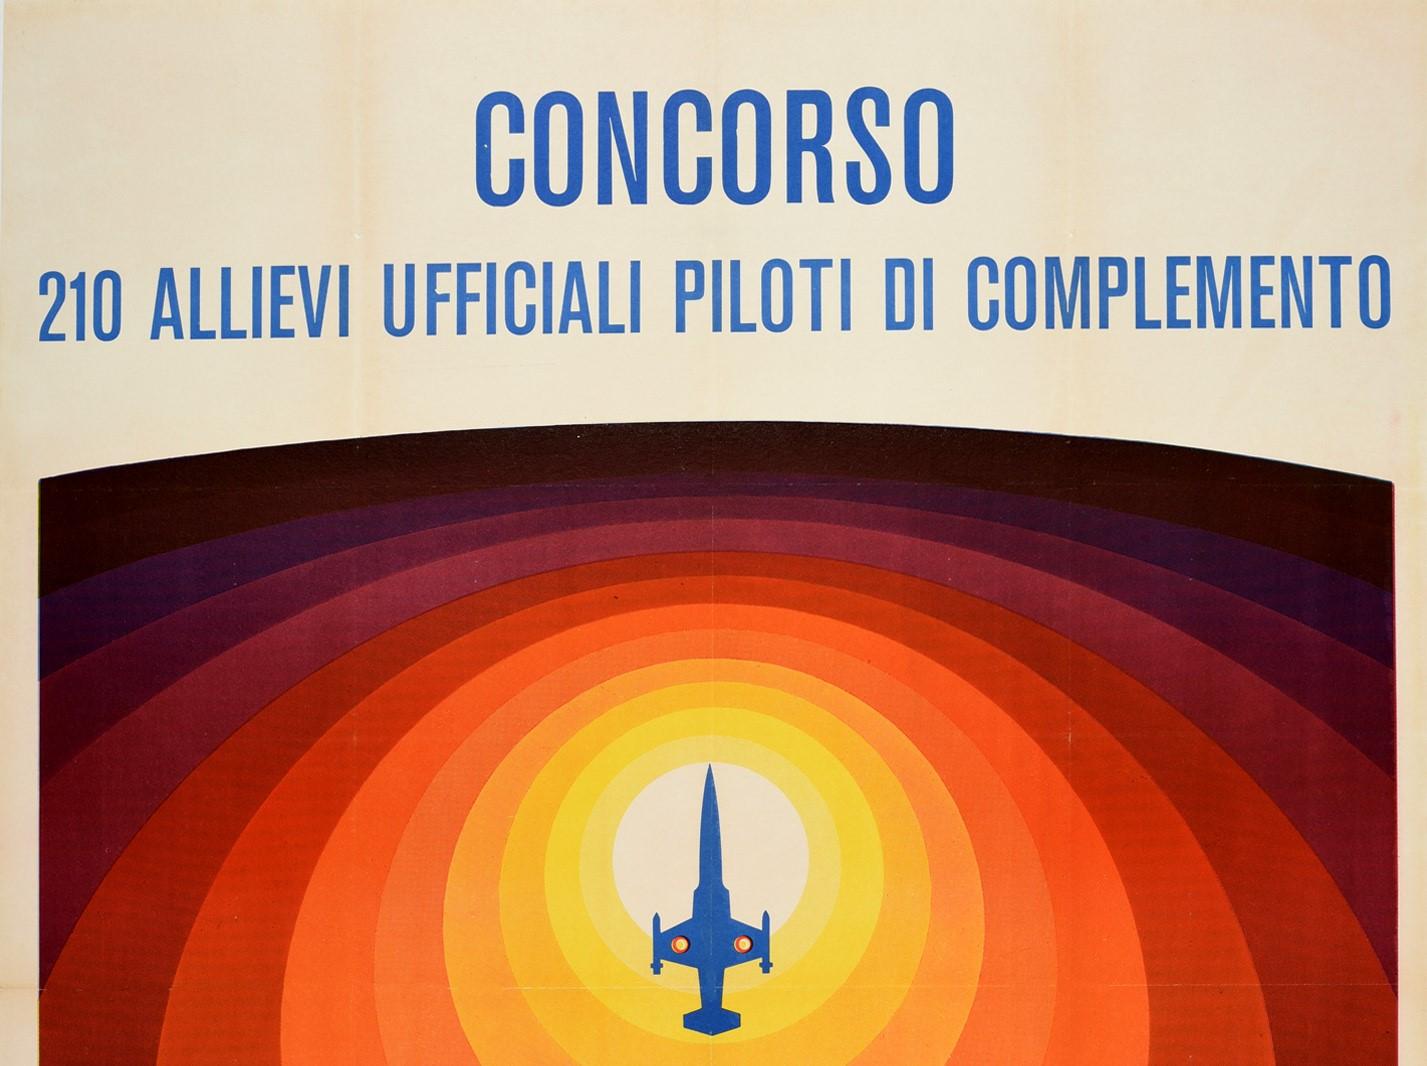 Original vintage poster for the Competition 210 Student Officers Supplementary Pilots / Concorso 210 Allievi Ufficiali Piloti Di Complemento featuring a great graphic design depicting a fighter jet plane in the centre of colourful lines radiating